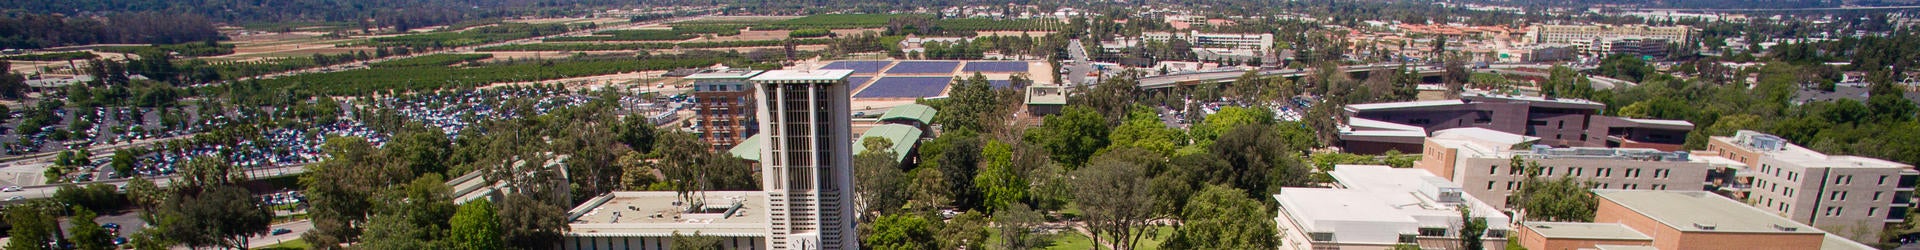 UCR Aerial Photo of Belltower and campus